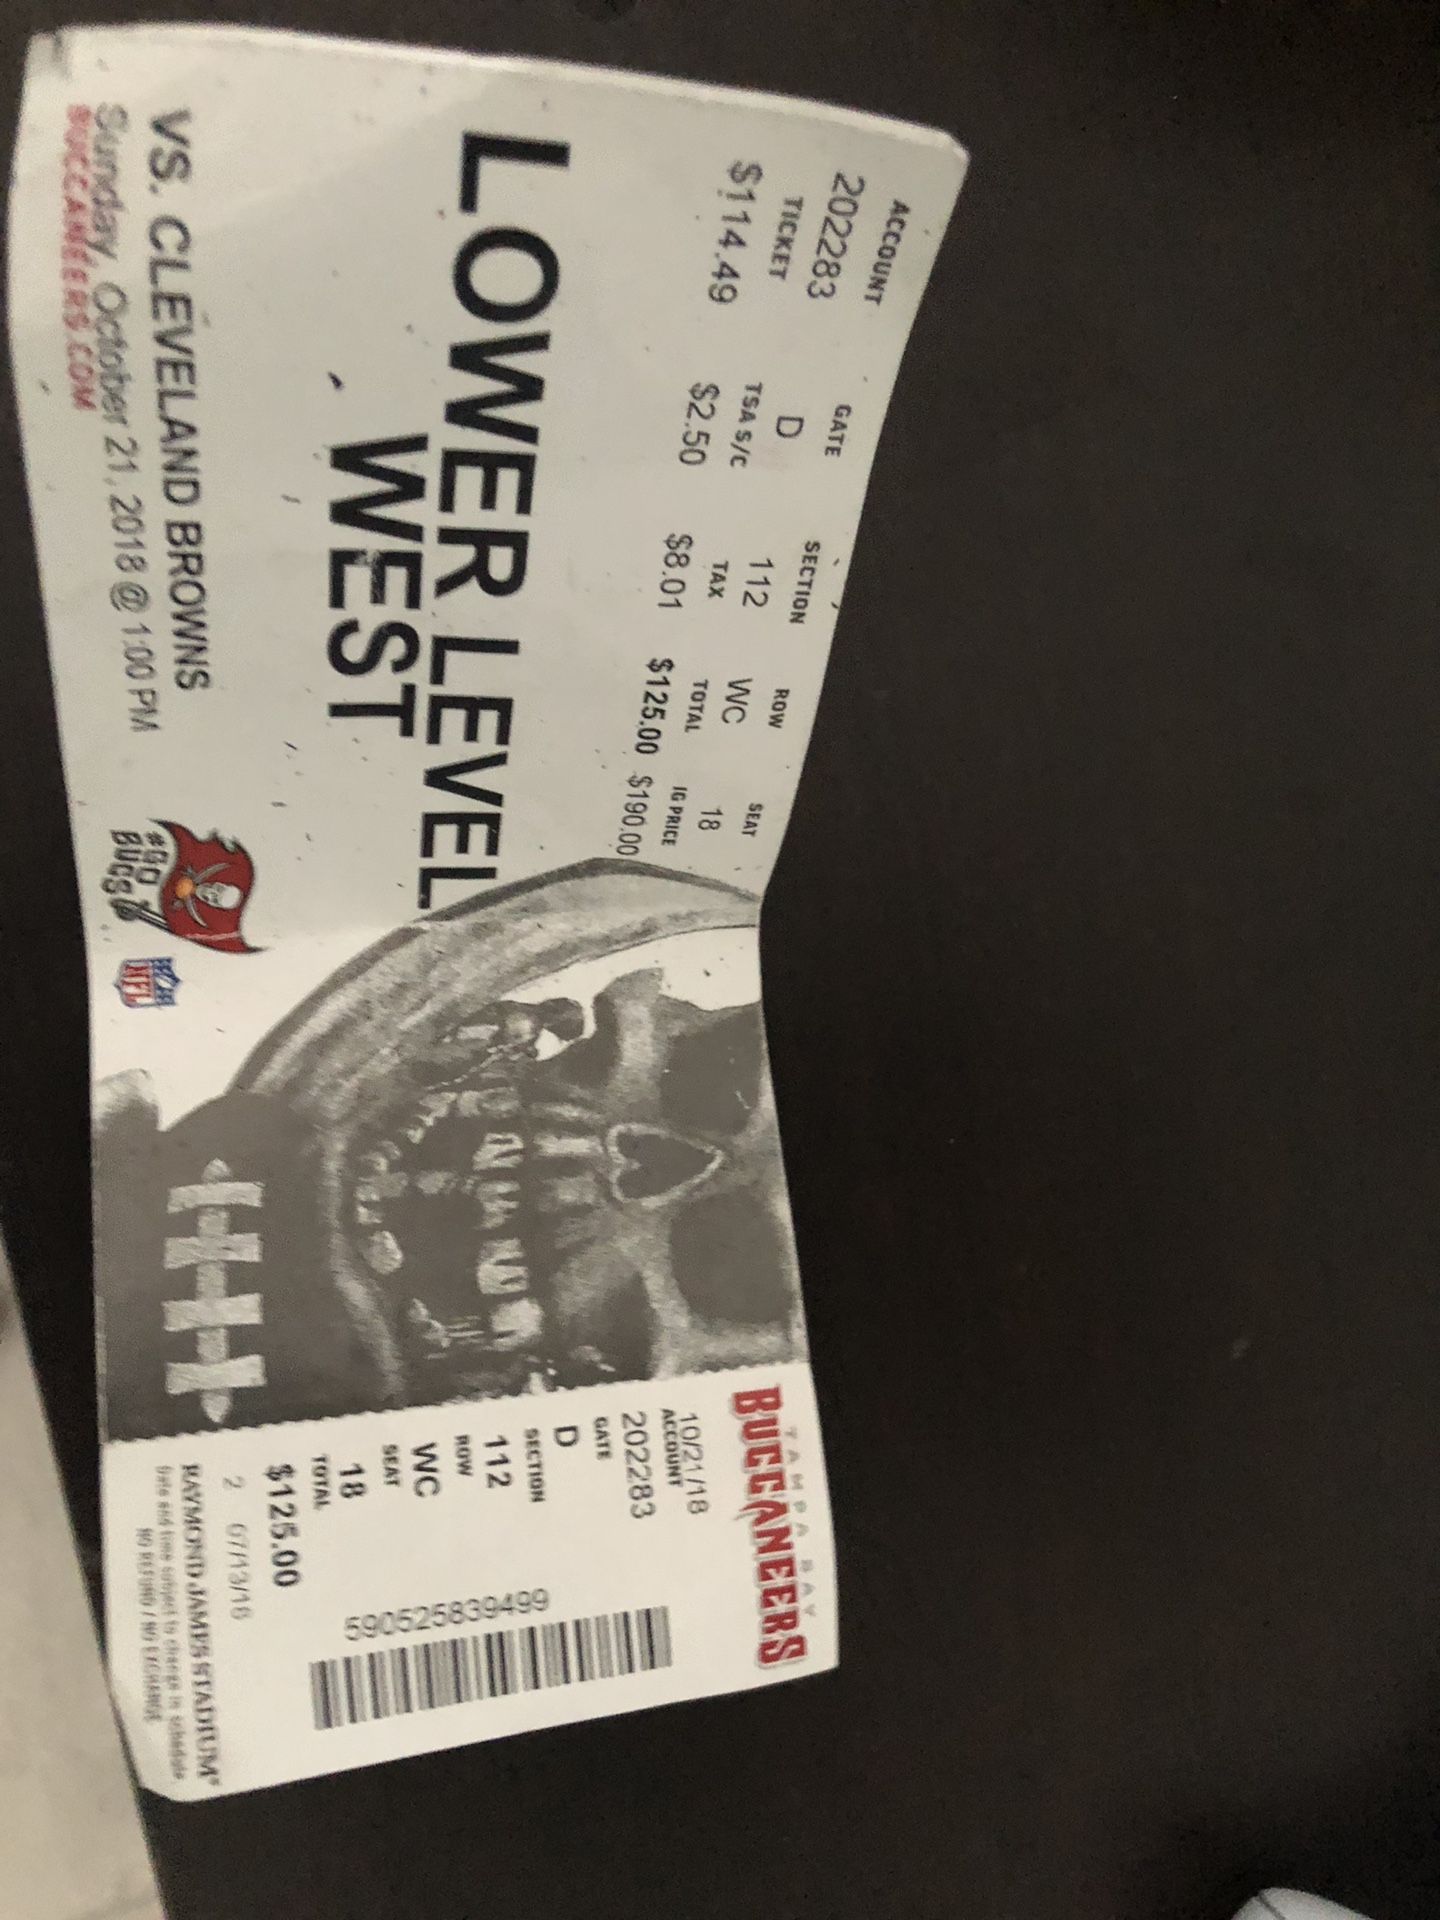 bucs tickets raymond james stadium tampa bay buccaneers home tickets VS.  Washington Redskins for Sale in Tampa, FL - OfferUp